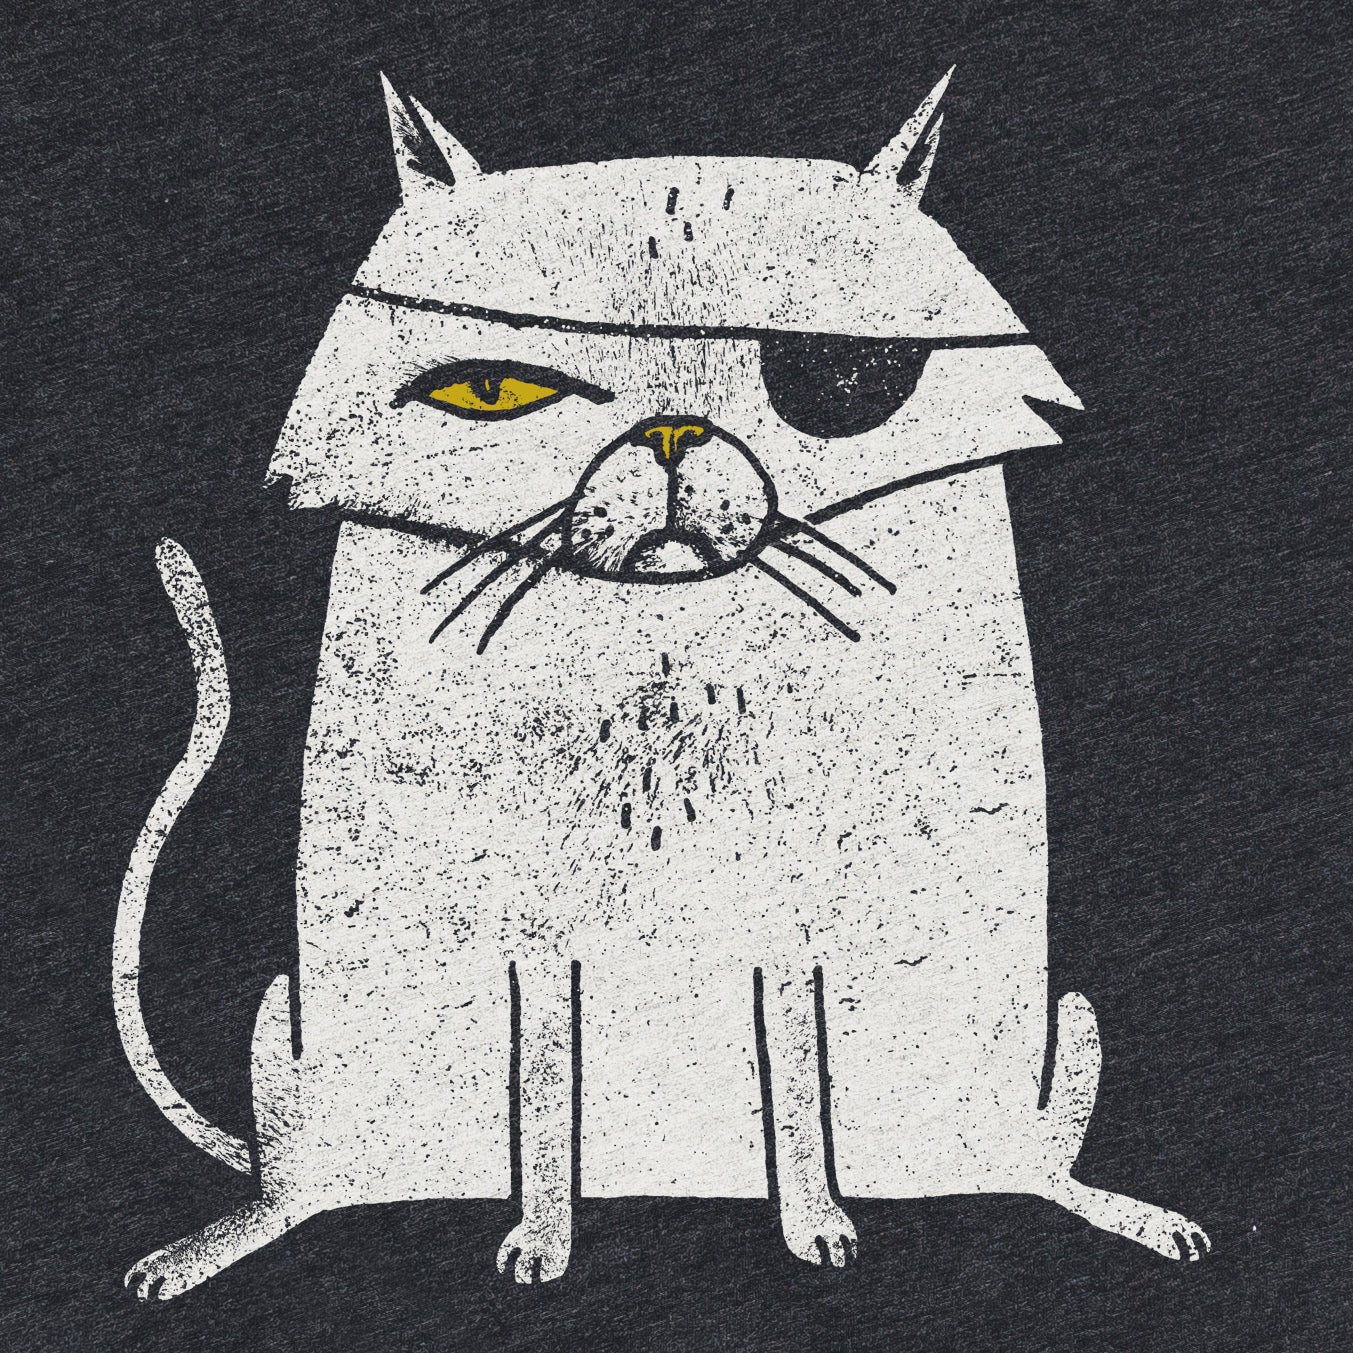 Super soft gray black mens/womens graphic tshirt of a one eyed cat with an eyepatch. The cat looks like a pirate or an evil Bond villian. Factory 43 is a graphic design studio that makes art with a PNW vibe that reflects their Midwest/Southern roots. This cotton/polyester/rayon shirt printed in Seattle, Washington. The cat is white with a yellow eye and nose.